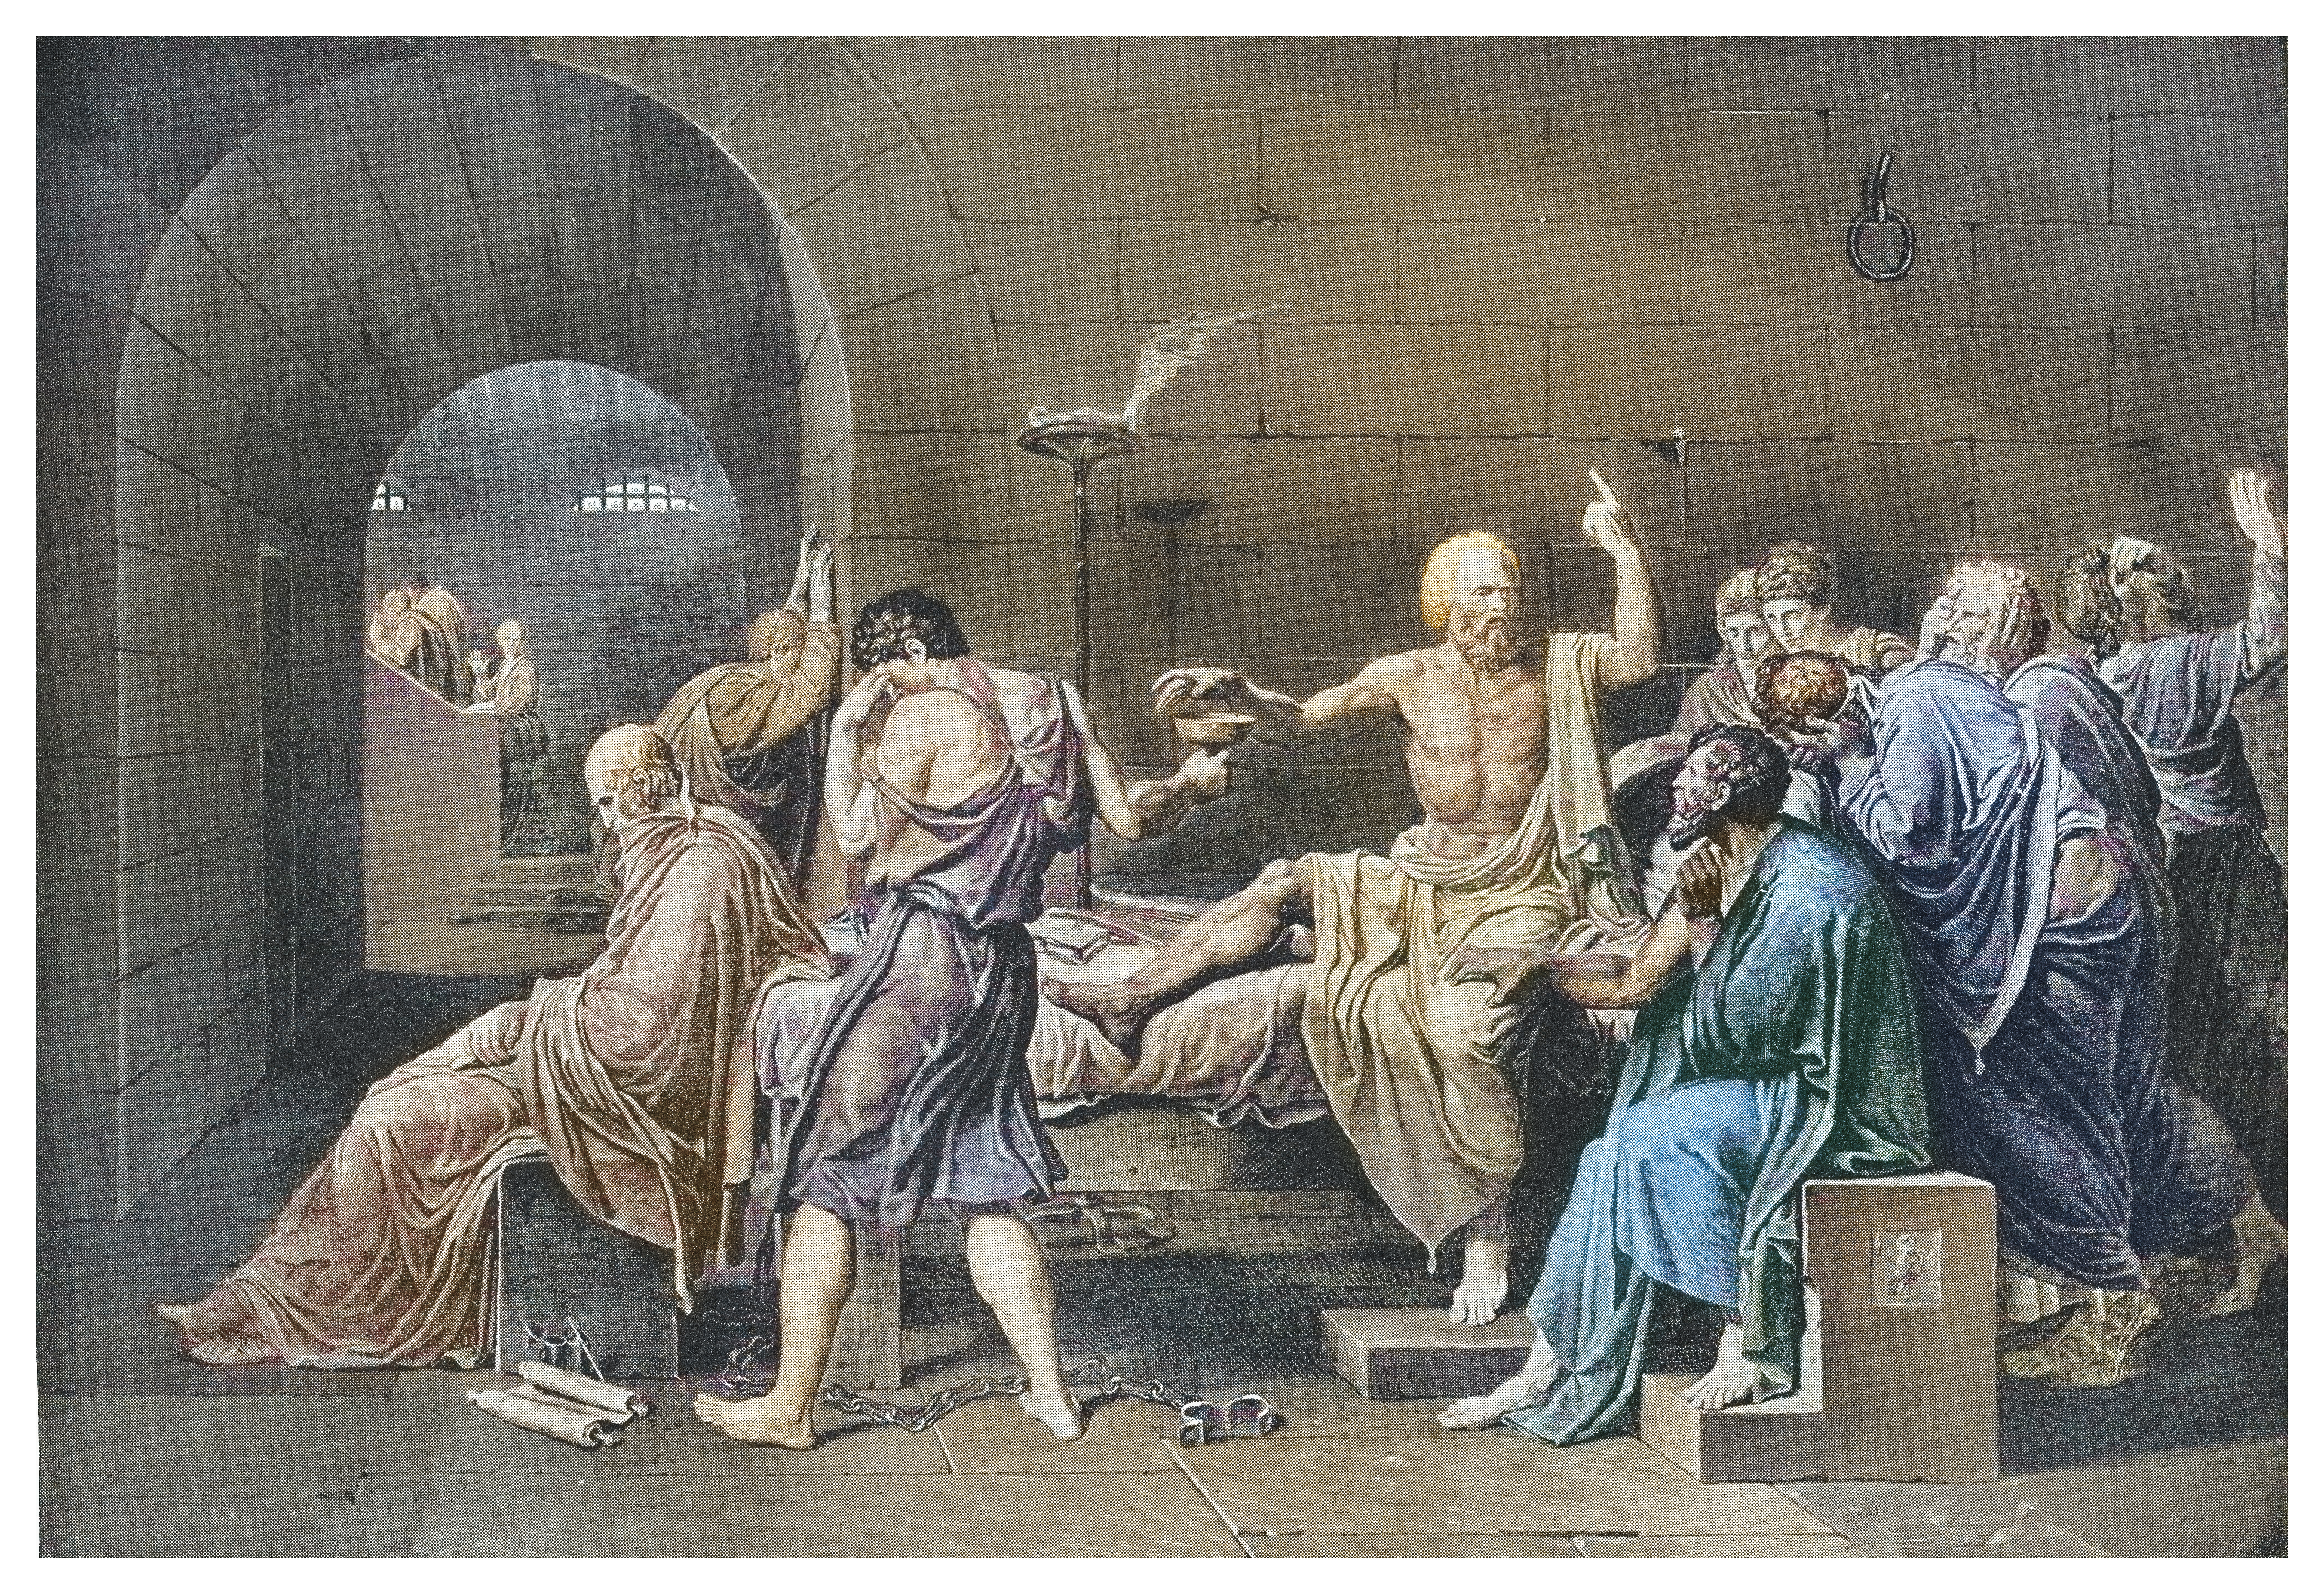 Was Athens Right to Kill Socrates?